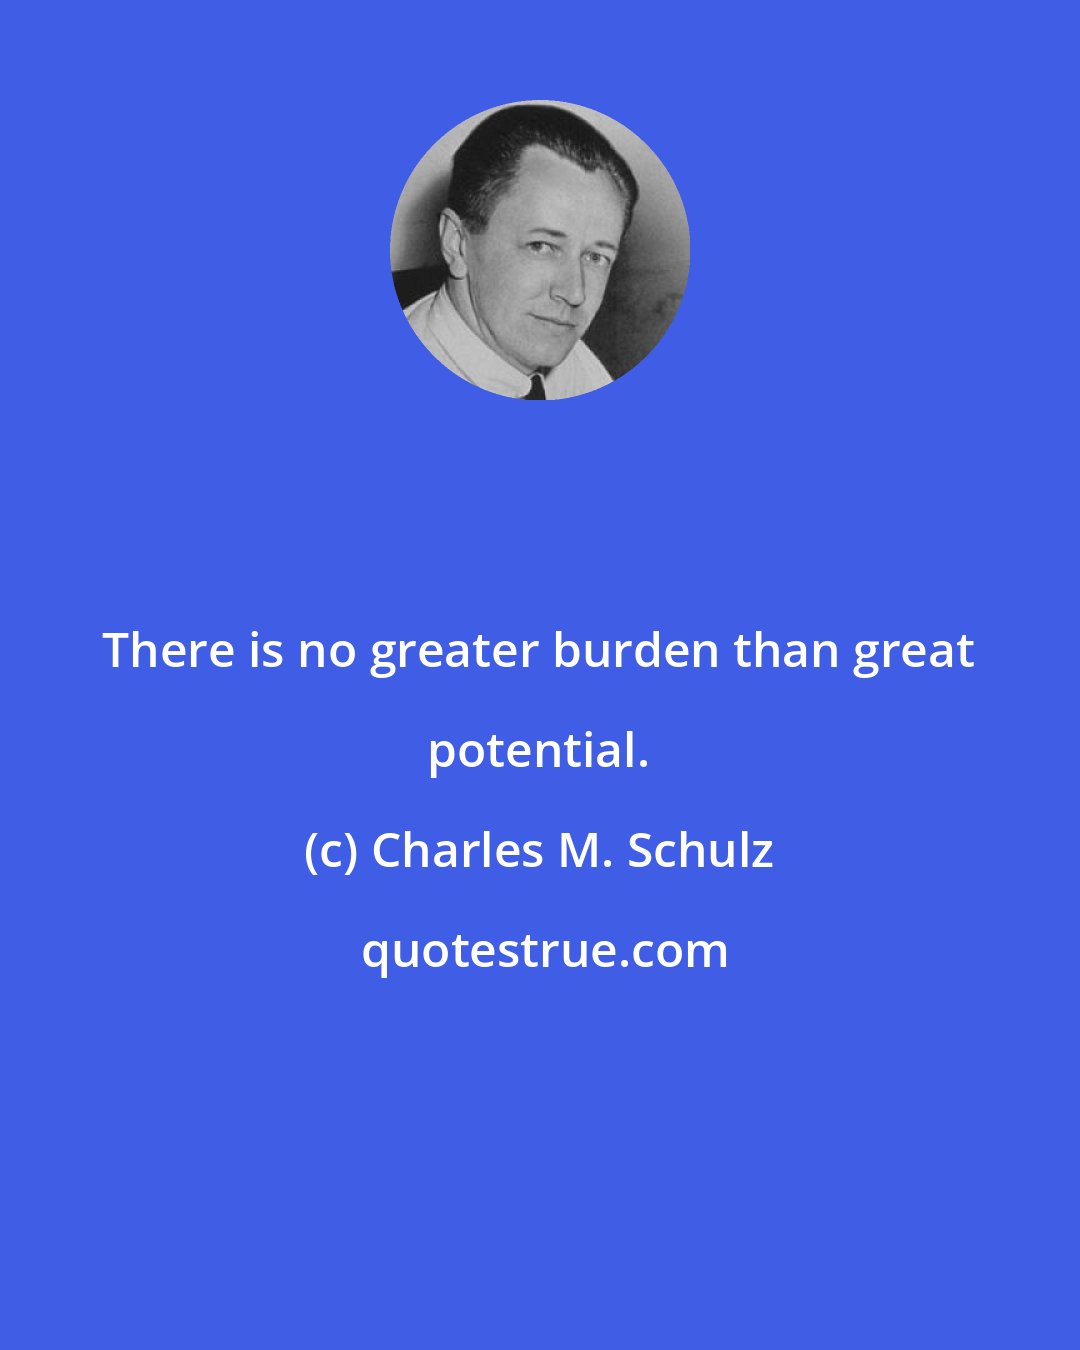 Charles M. Schulz: There is no greater burden than great potential.